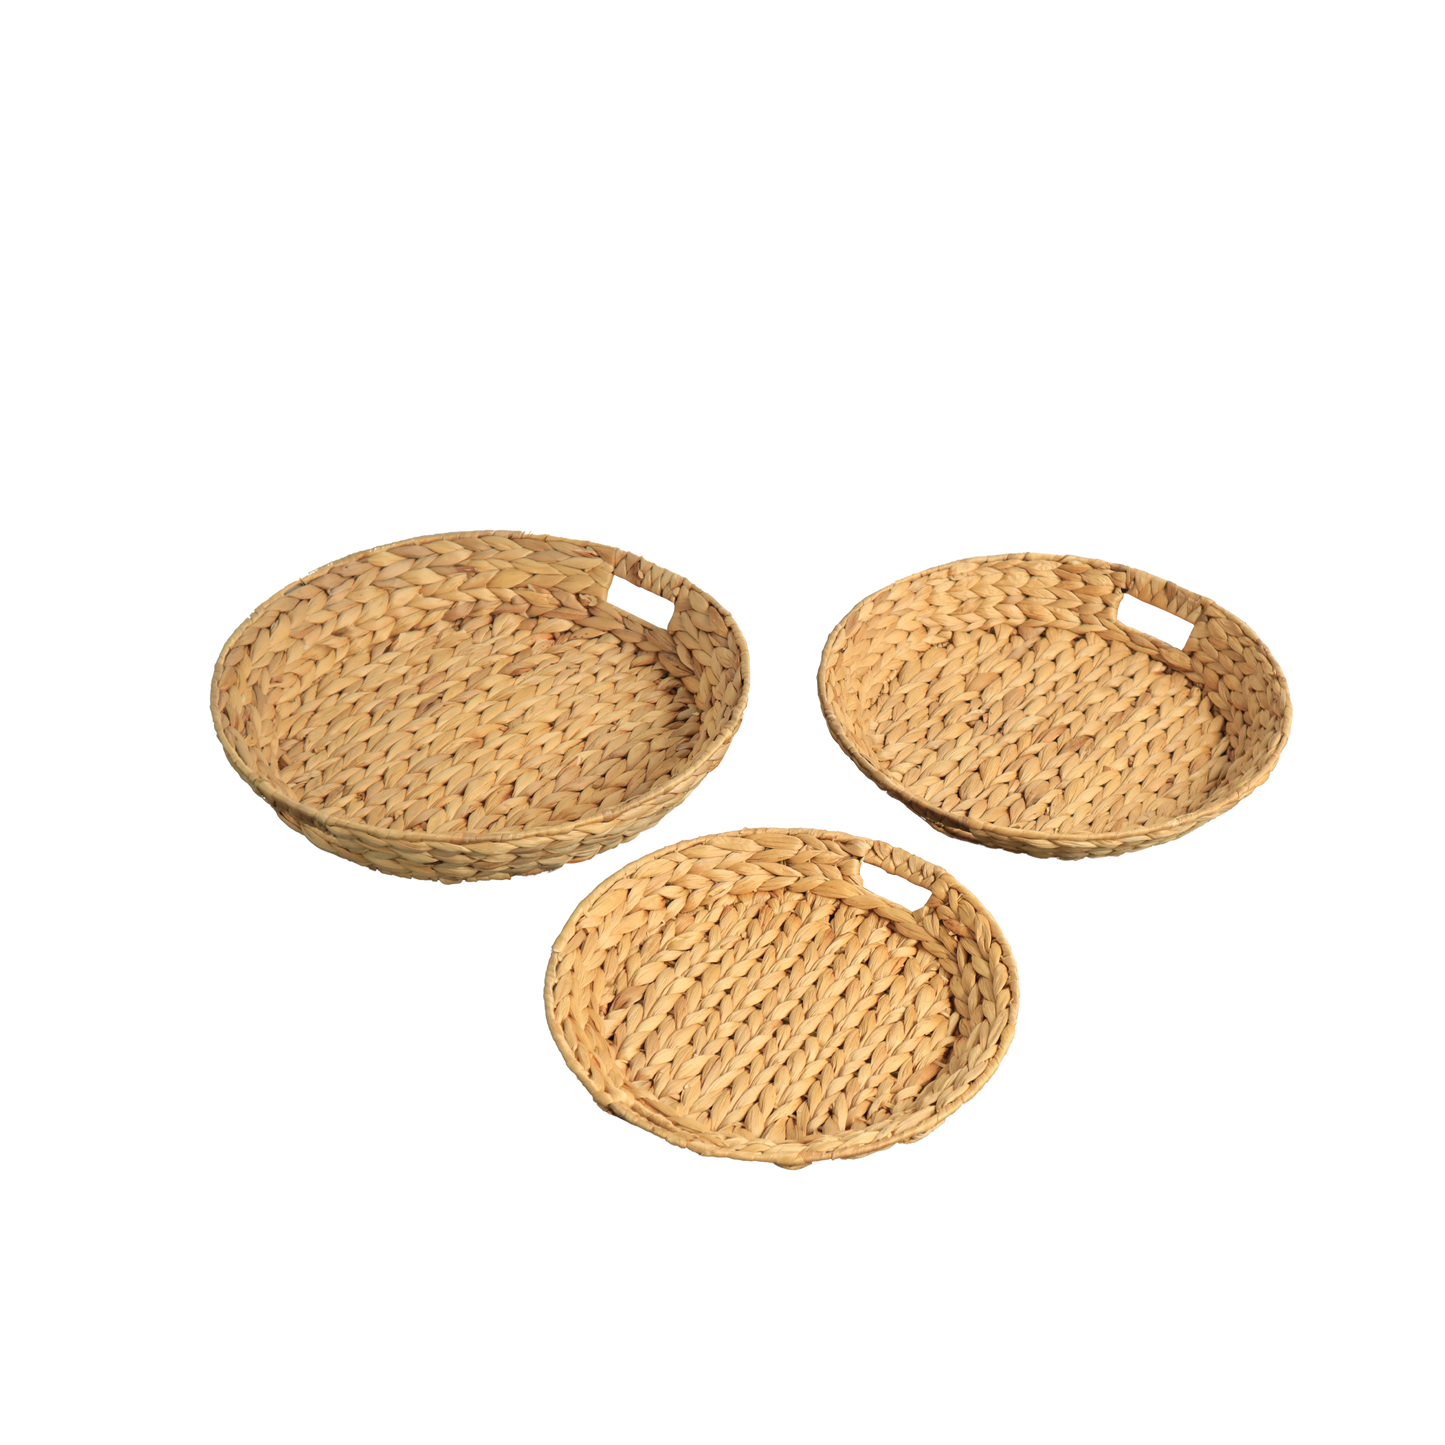 Eden Grace Set of 3 Hand Woven Tapered Round Wicker Serving Trays, Arrow Weave Design with Handles, Tea Tray, Fruit Basket for Coffee Table and Breakfasts